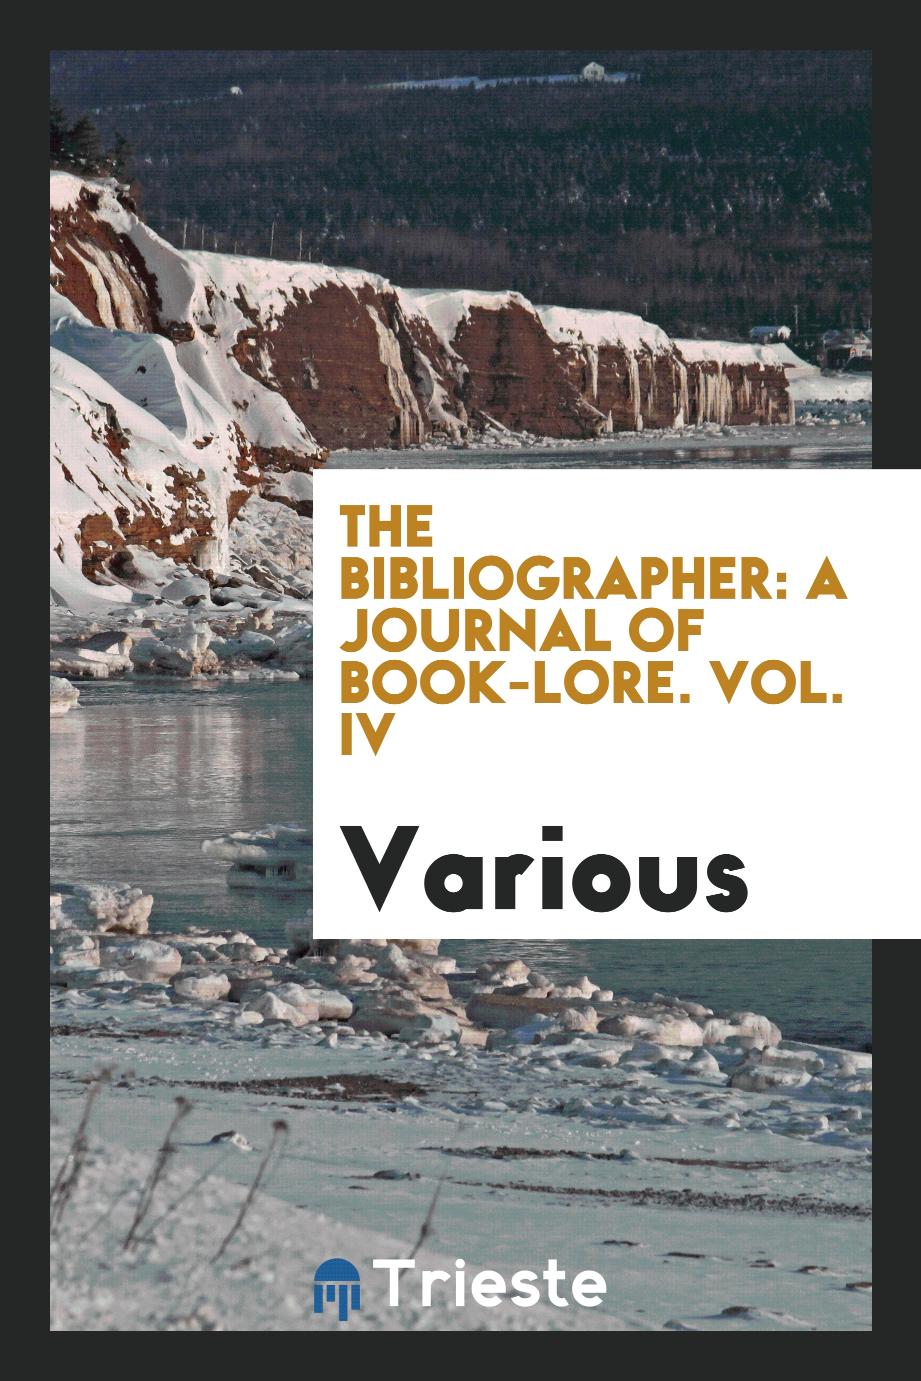 The bibliographer: A Journal of Book-Lore. Vol. IV